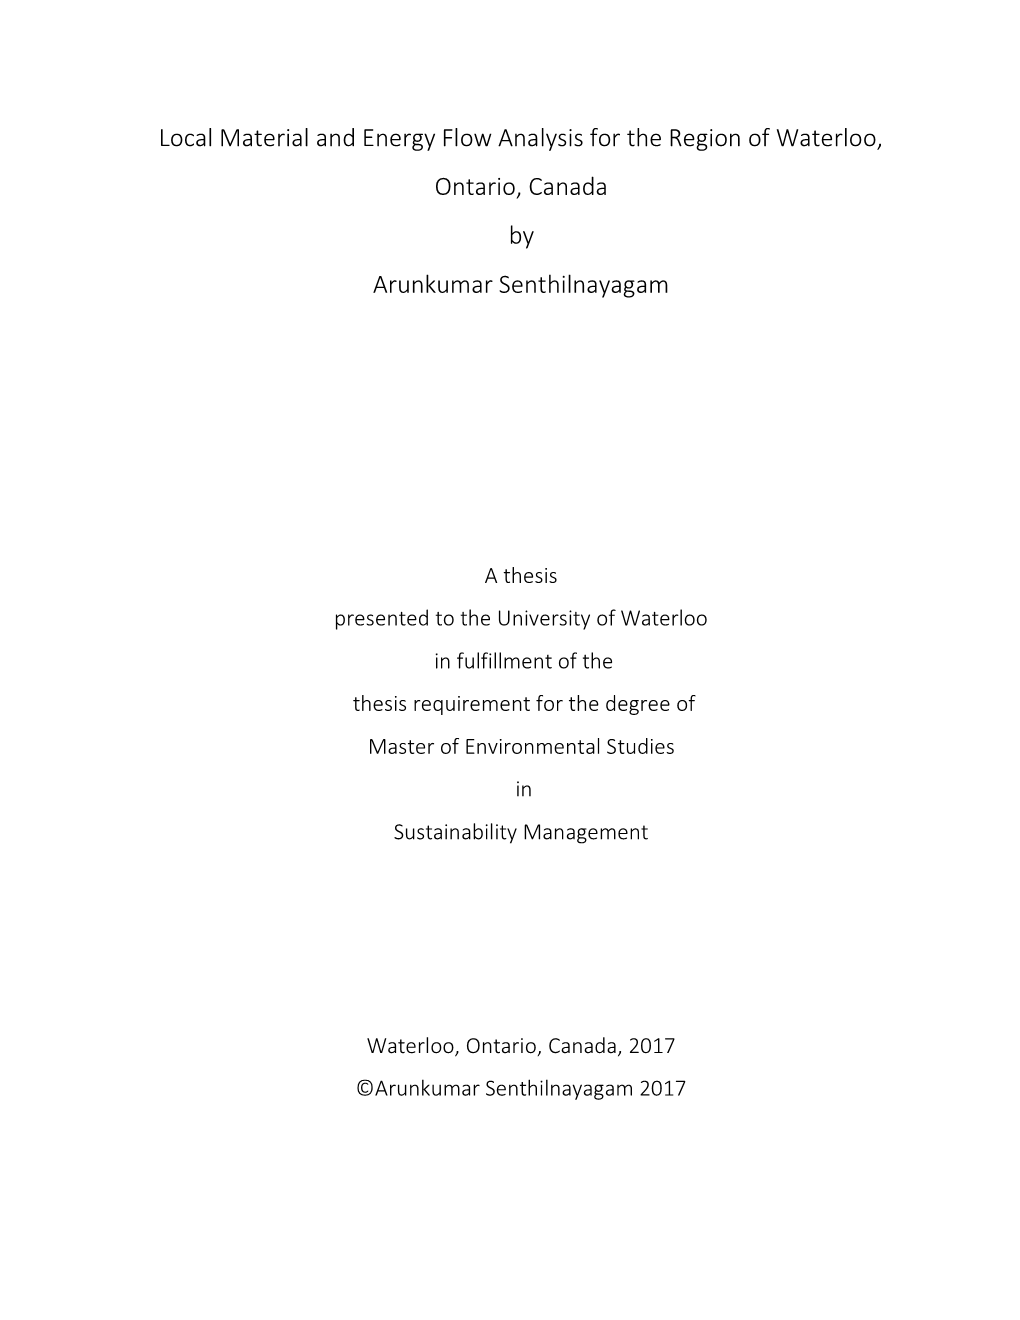 Local Material and Energy Flow Analysis for the Region of Waterloo, Ontario, Canada by Arunkumar Senthilnayagam